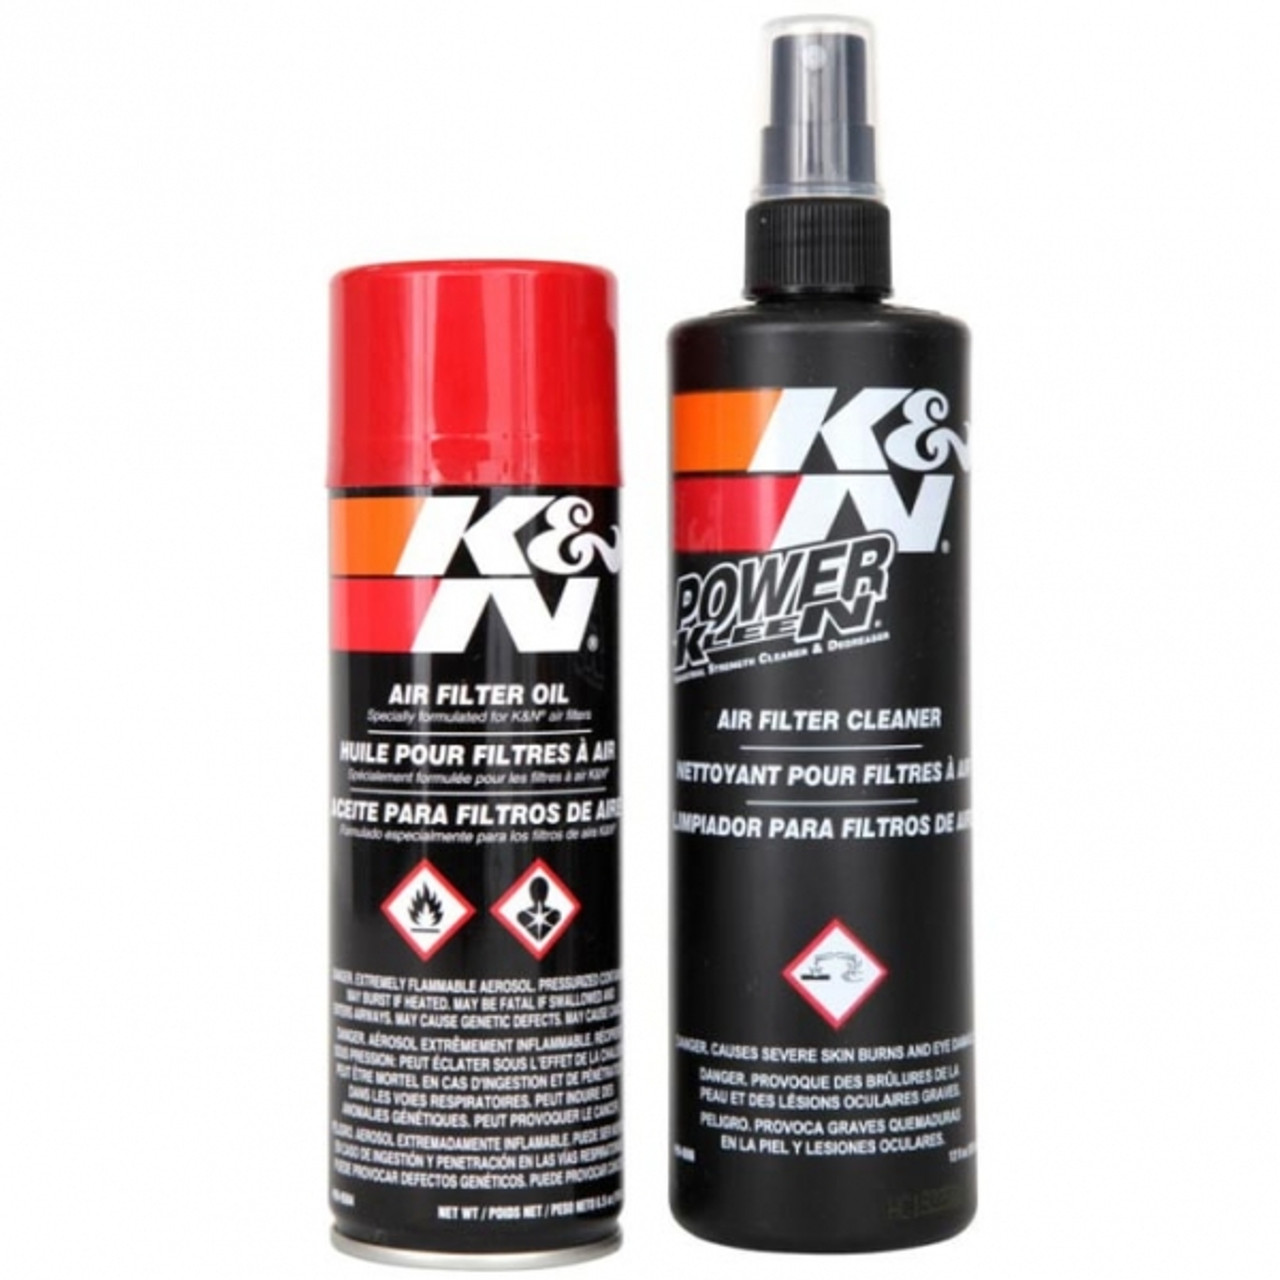 K&N RECHARGER FILTER CARE SERVICE KIT A SIX-STEP MAINTENANCE SYSTEM DESIGNED TO RECHARGE ANY K&N AIR FILTER